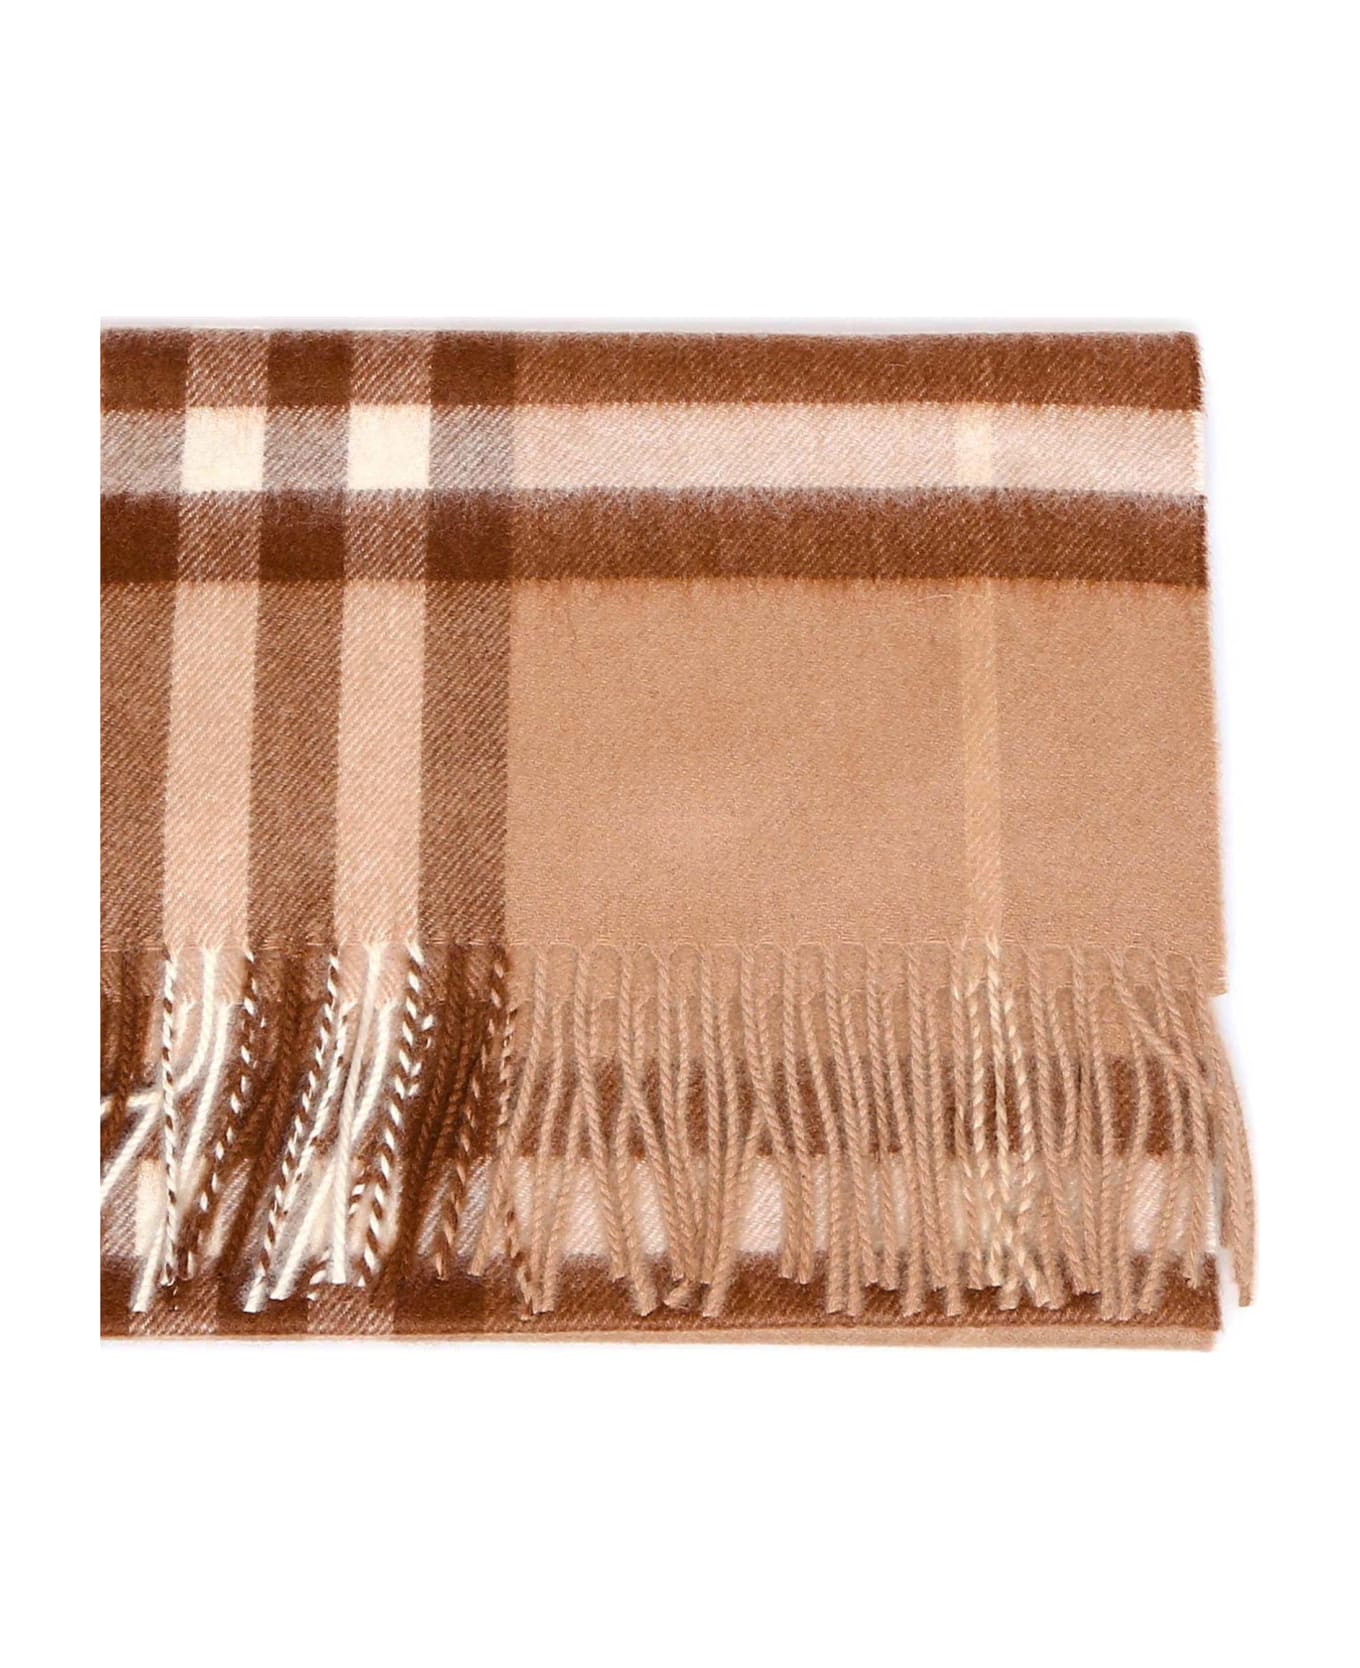 Burberry The Classic Check Scarf - Brown スカーフ